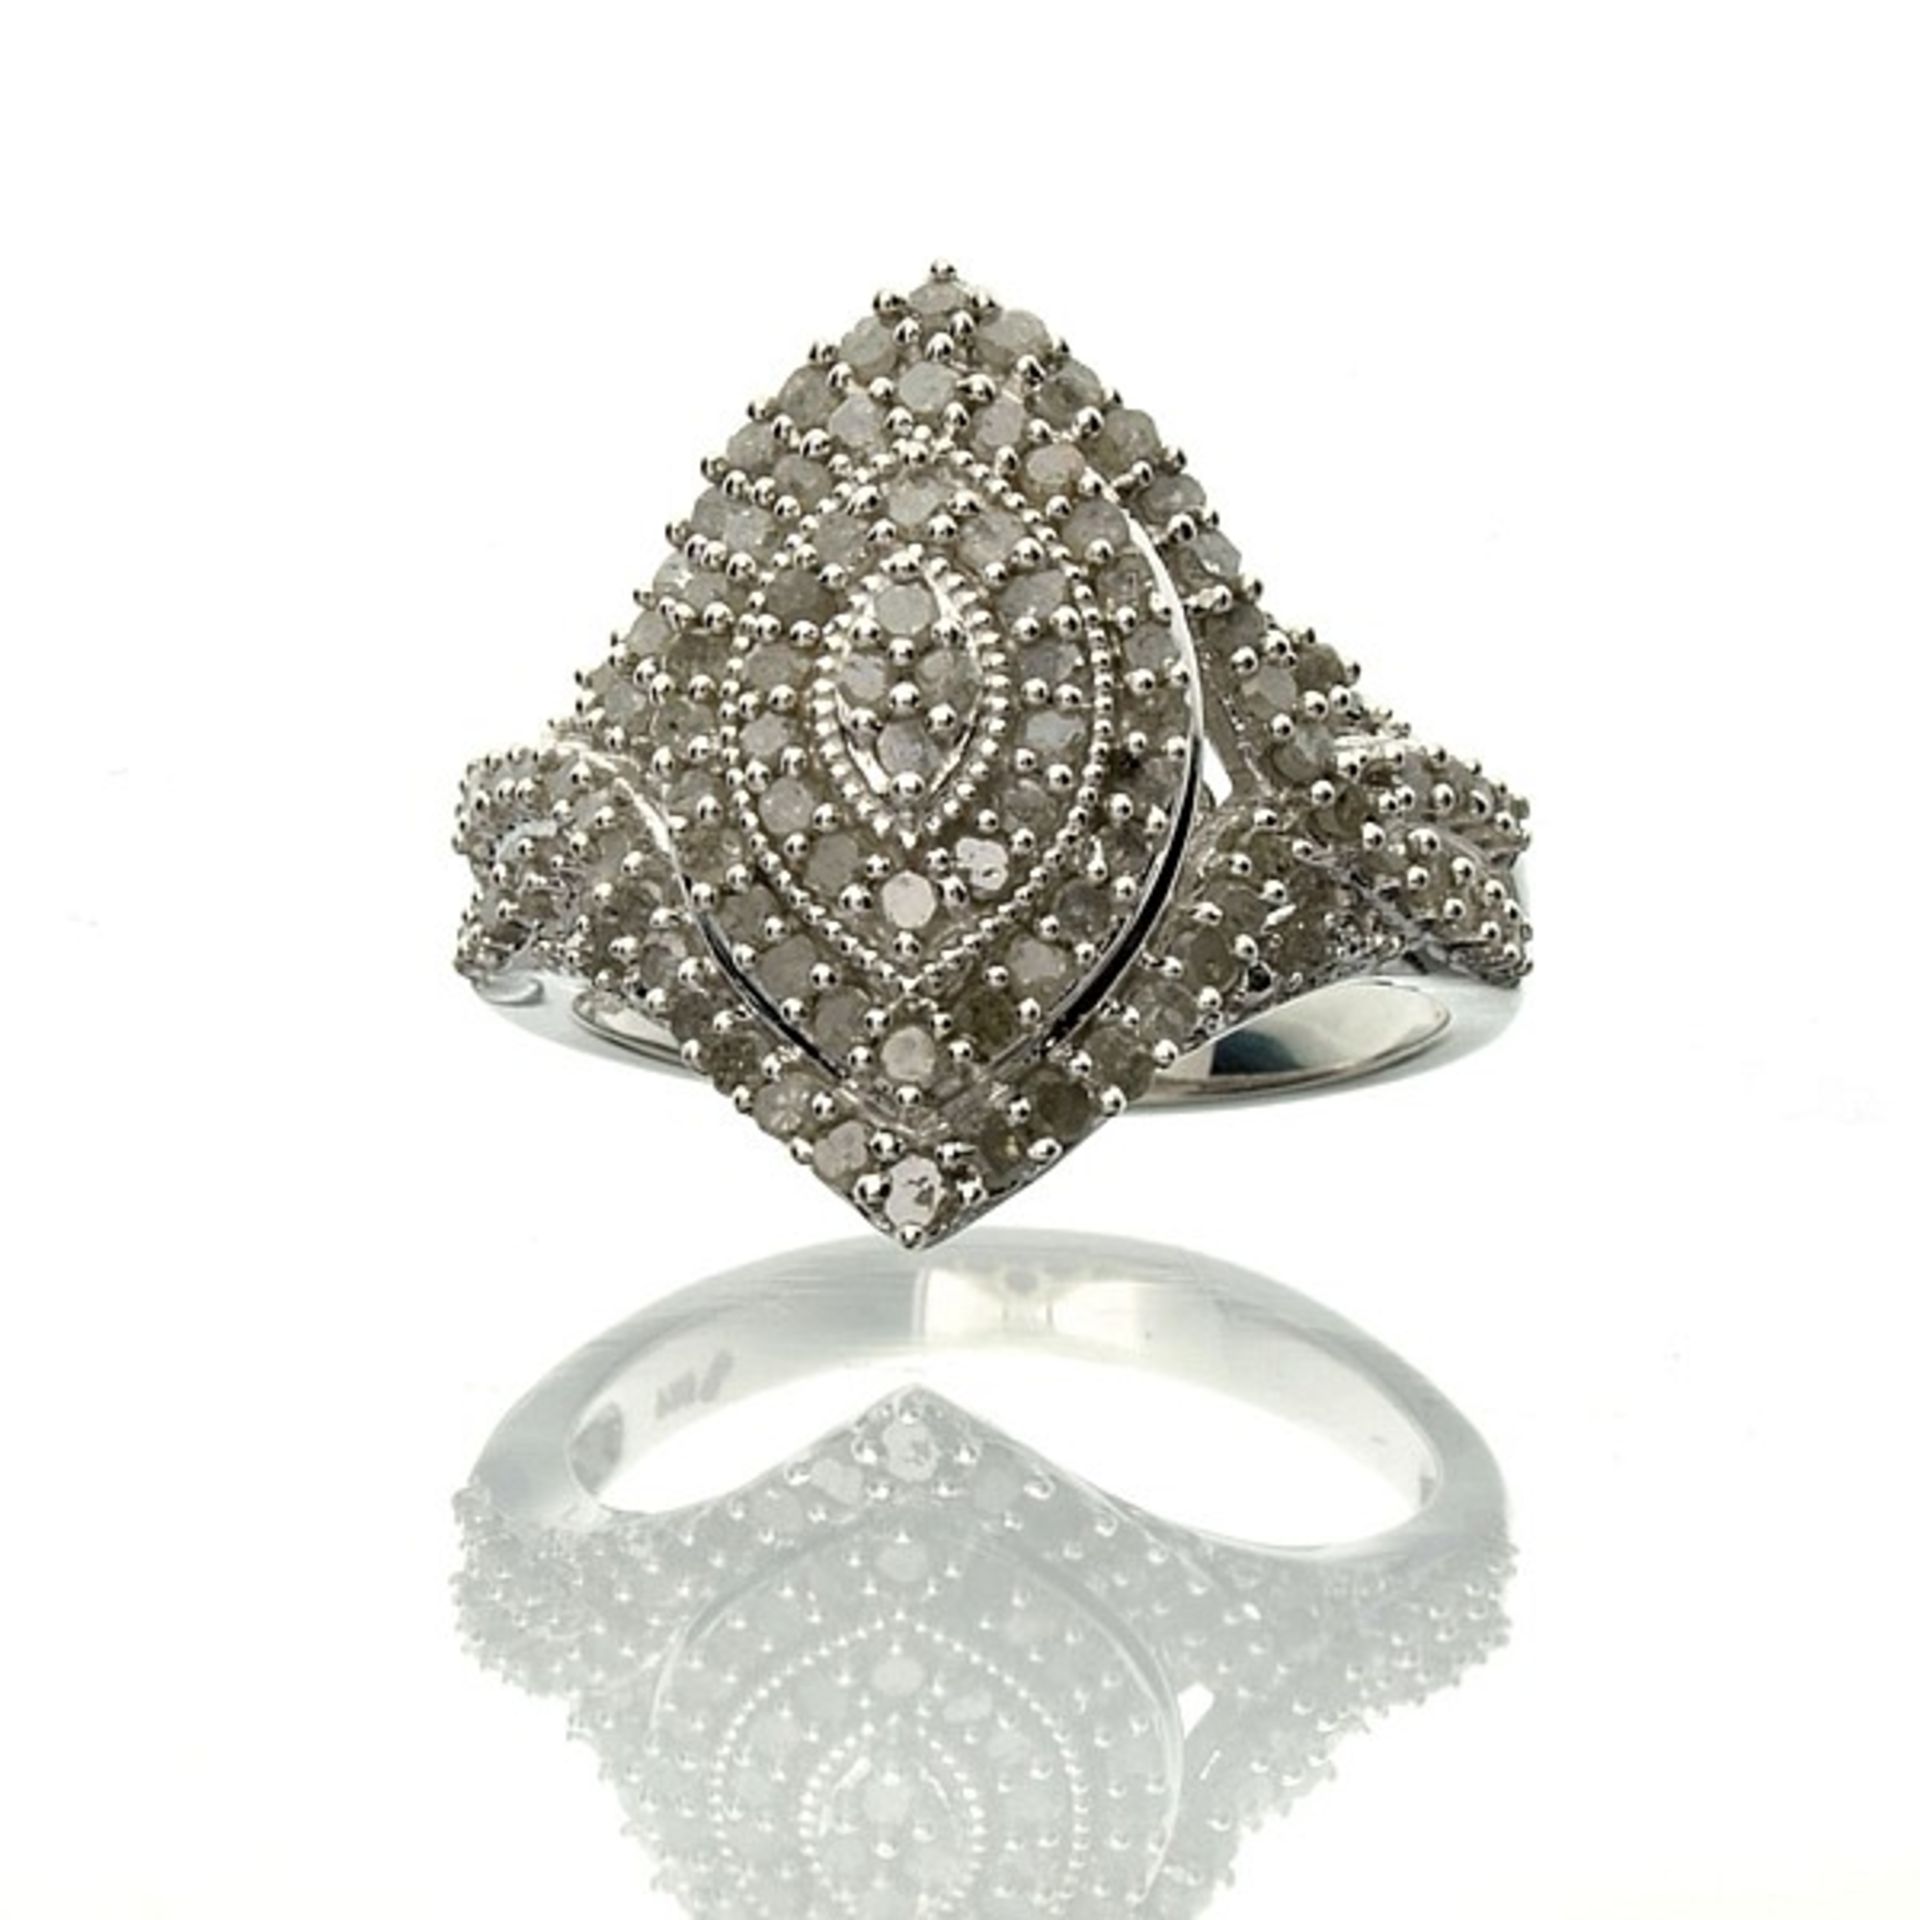 Bling, Bling 100 Round Cut Diamonds 1.00ct Platinum Over Silver Ring  Appraisal value $850.00 approx